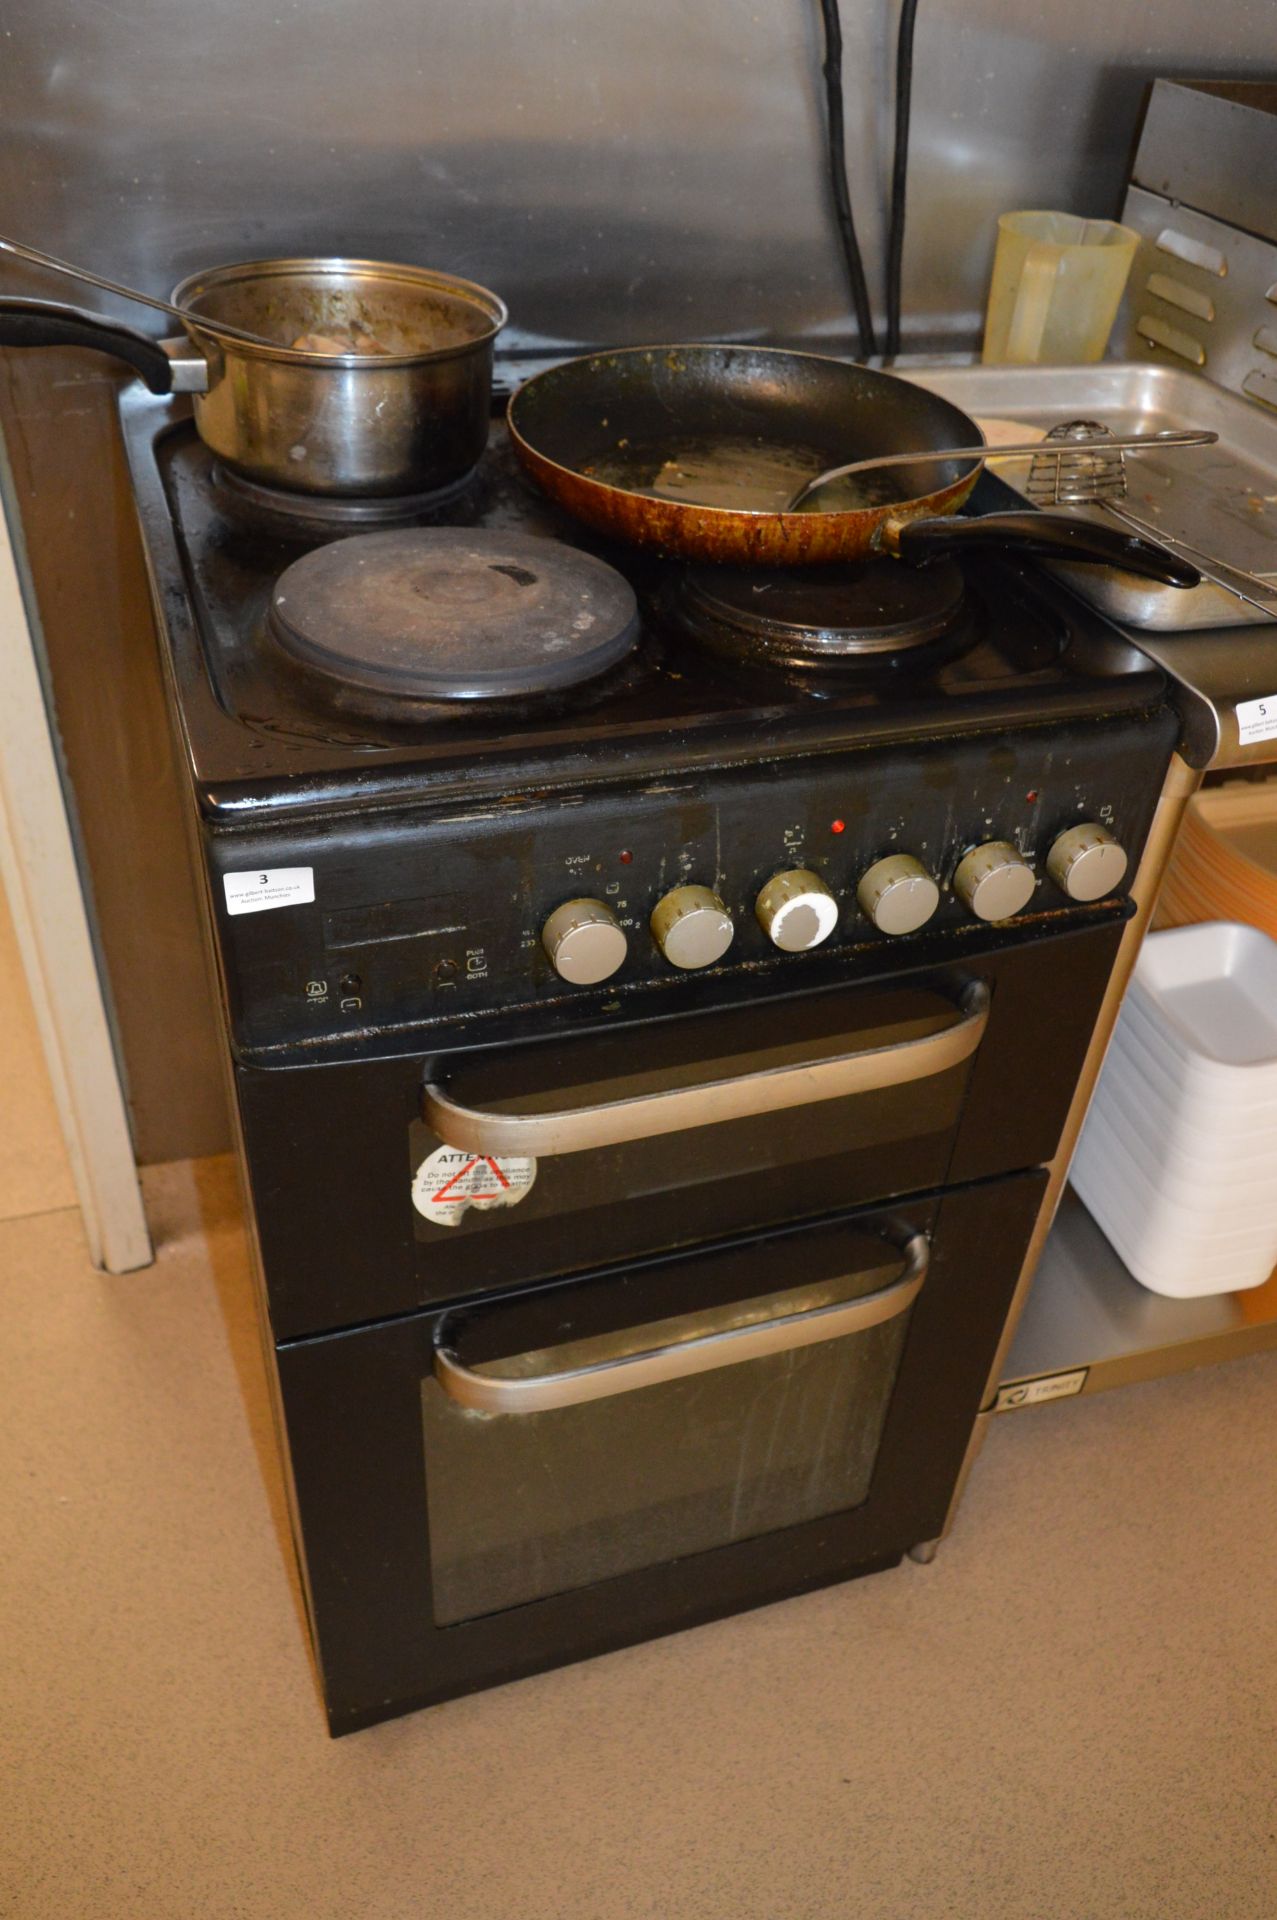 *Freestanding Electric Cooker over Double Oven